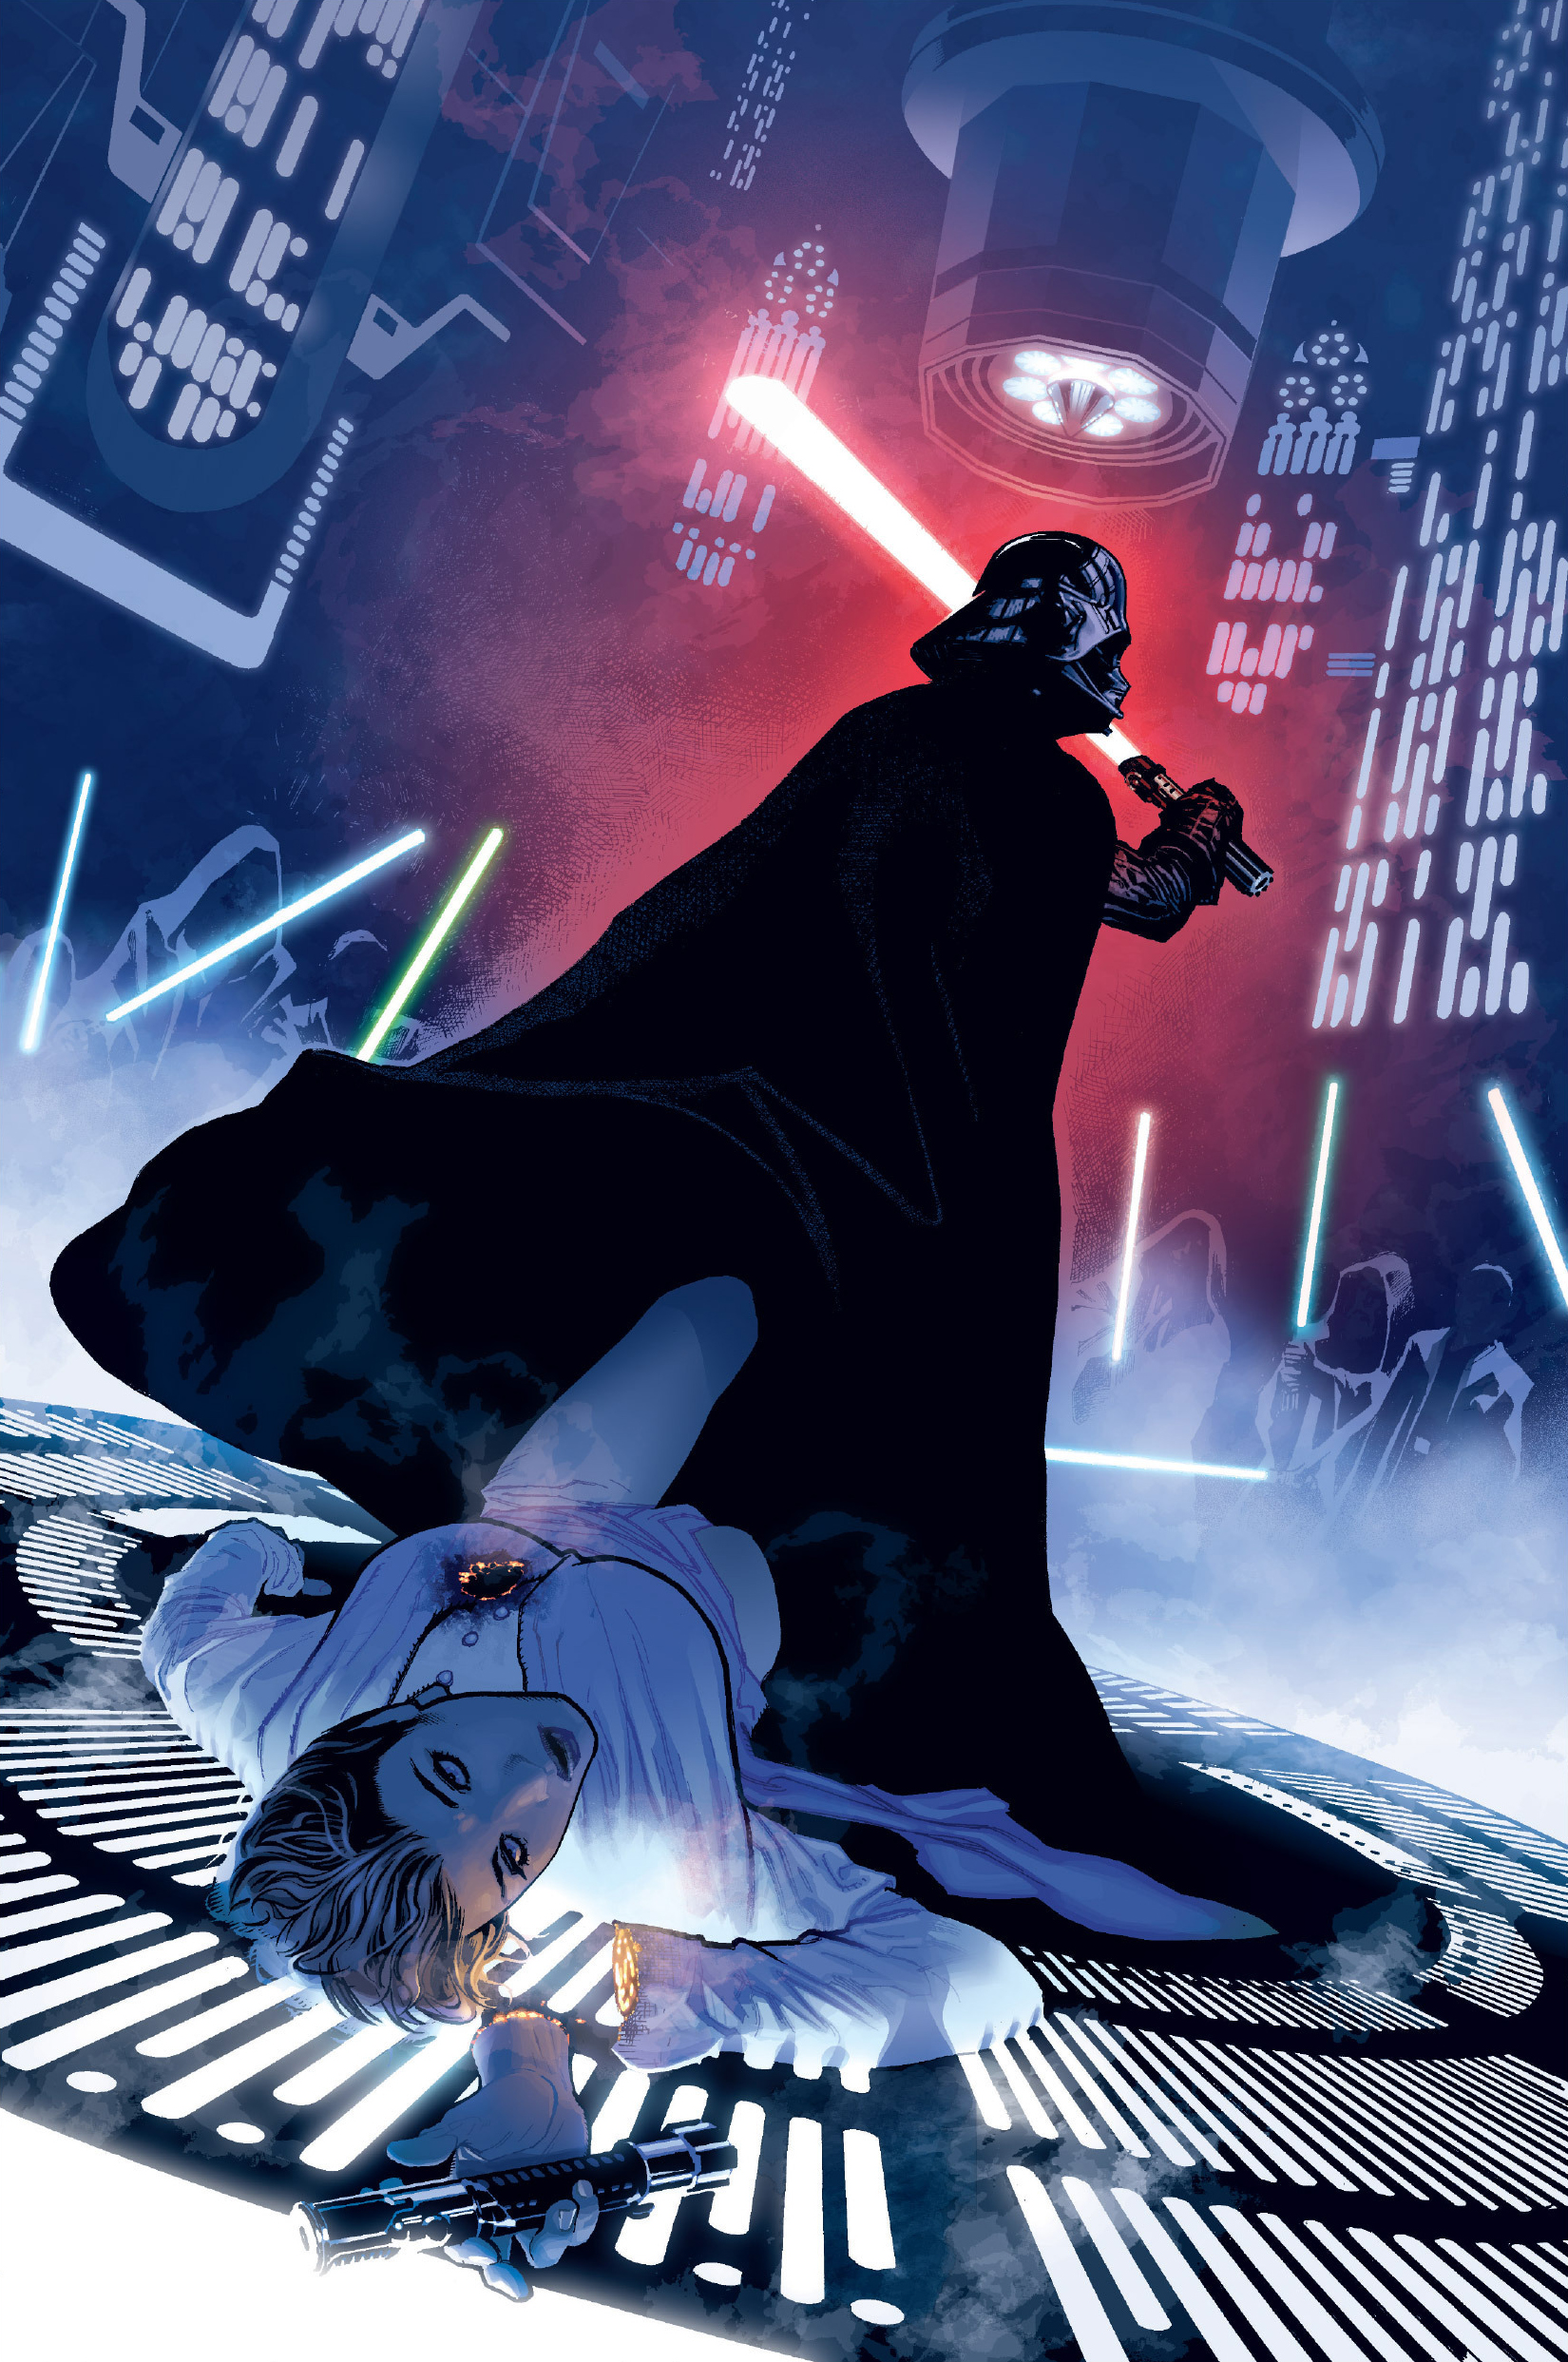 The Blue Shadow Virus Is Unleashed, Padme Gets Infected - Comic Vine